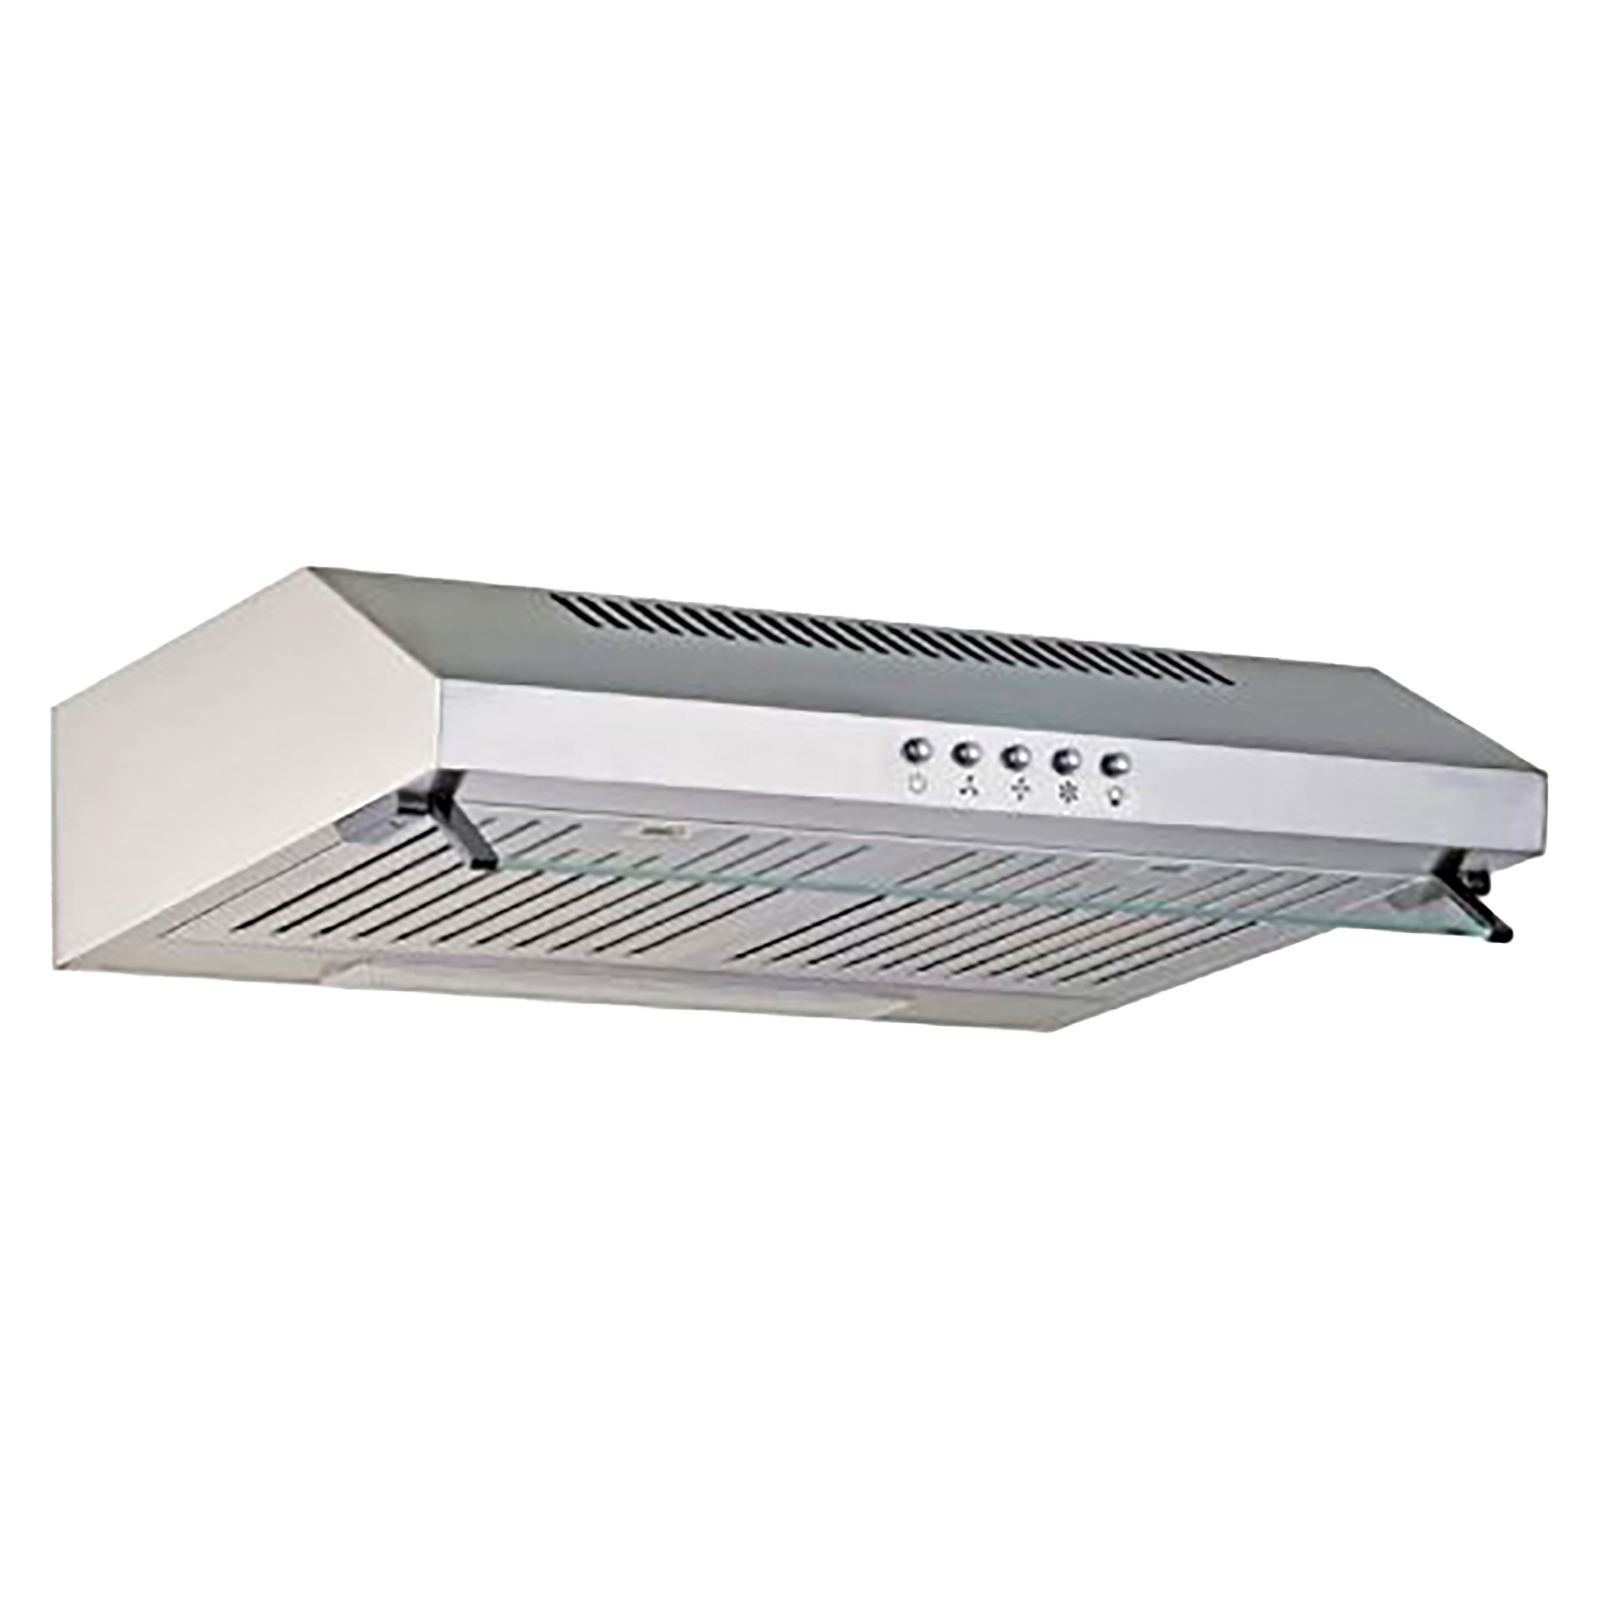 Faber Hood Ruby XL 700 m³/hr 60cm Wall Mount Chimney (Baffle Filter, PB SS 60, Stainless Steel)_1